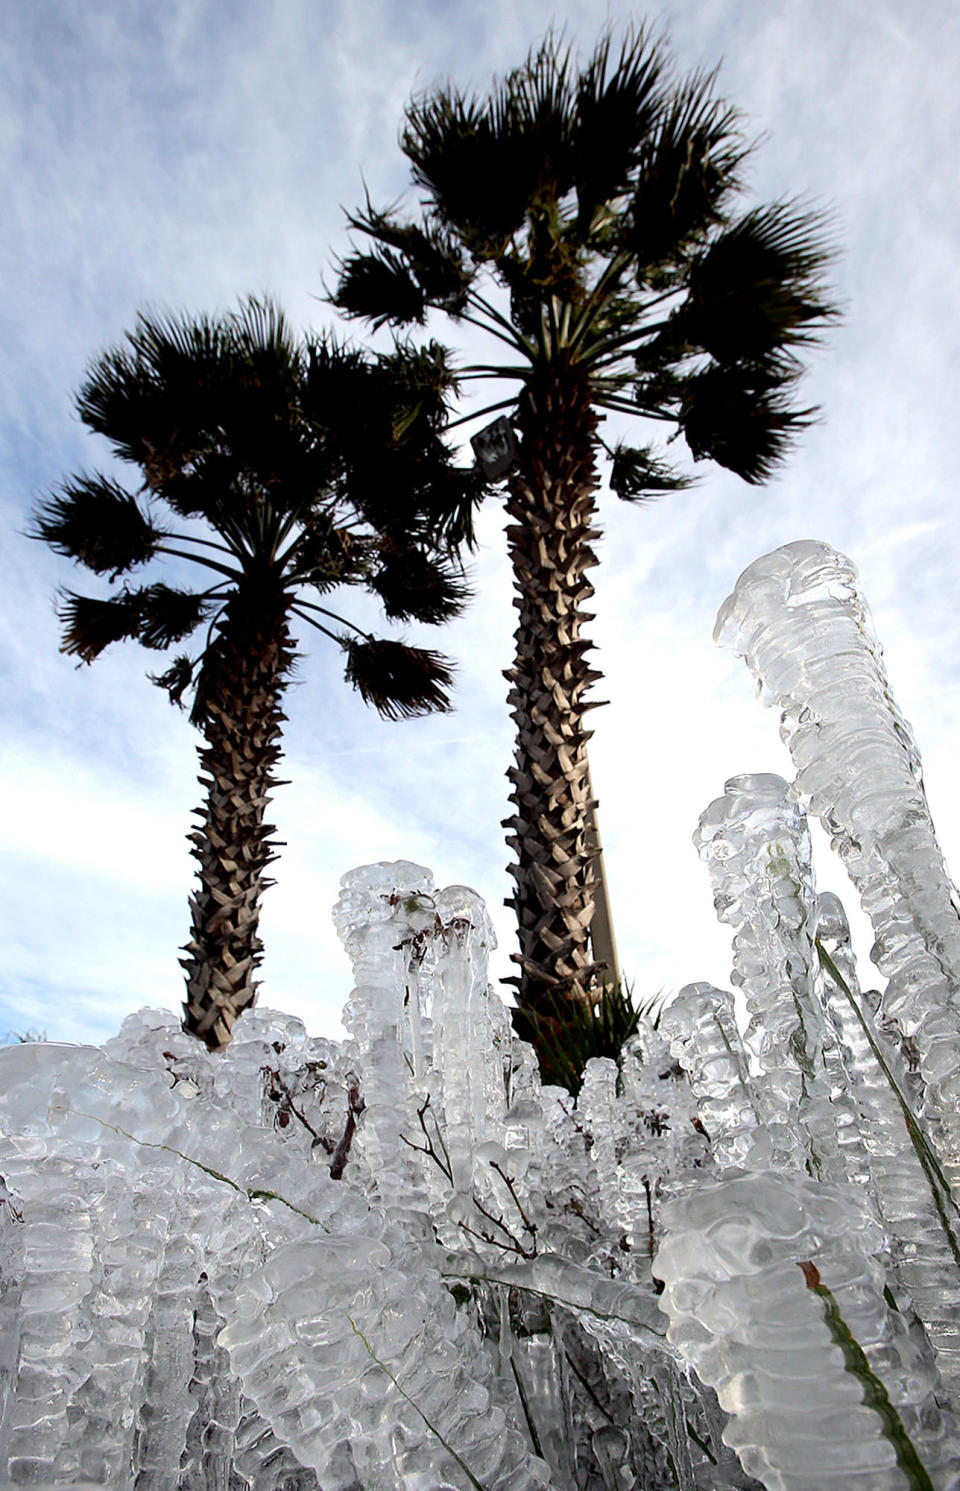 Ice-covered plants are seen in Panama City Beach, Fla. on Tuesday, Jan. 7, 2014. Brutal, record-breaking cold descended on the East and South, sending the mercury plummeting Tuesday. Sprinklers left on overnight created the icy cover. (AP Photo/The News Herald, Andrew Wardlow)